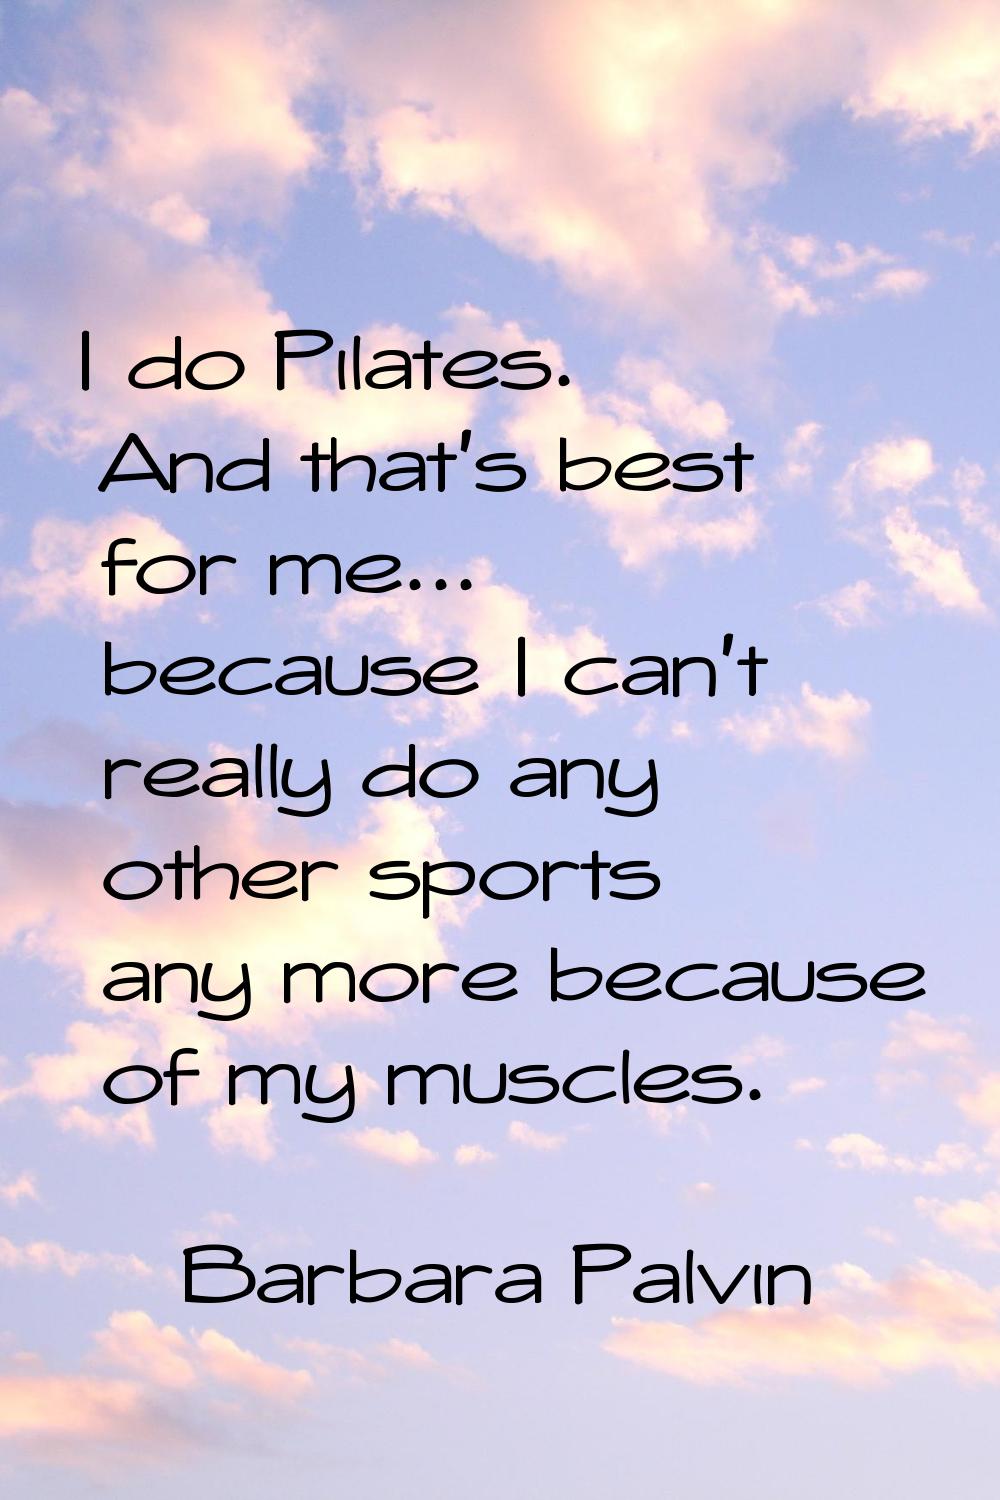 I do Pilates. And that's best for me... because I can't really do any other sports any more because